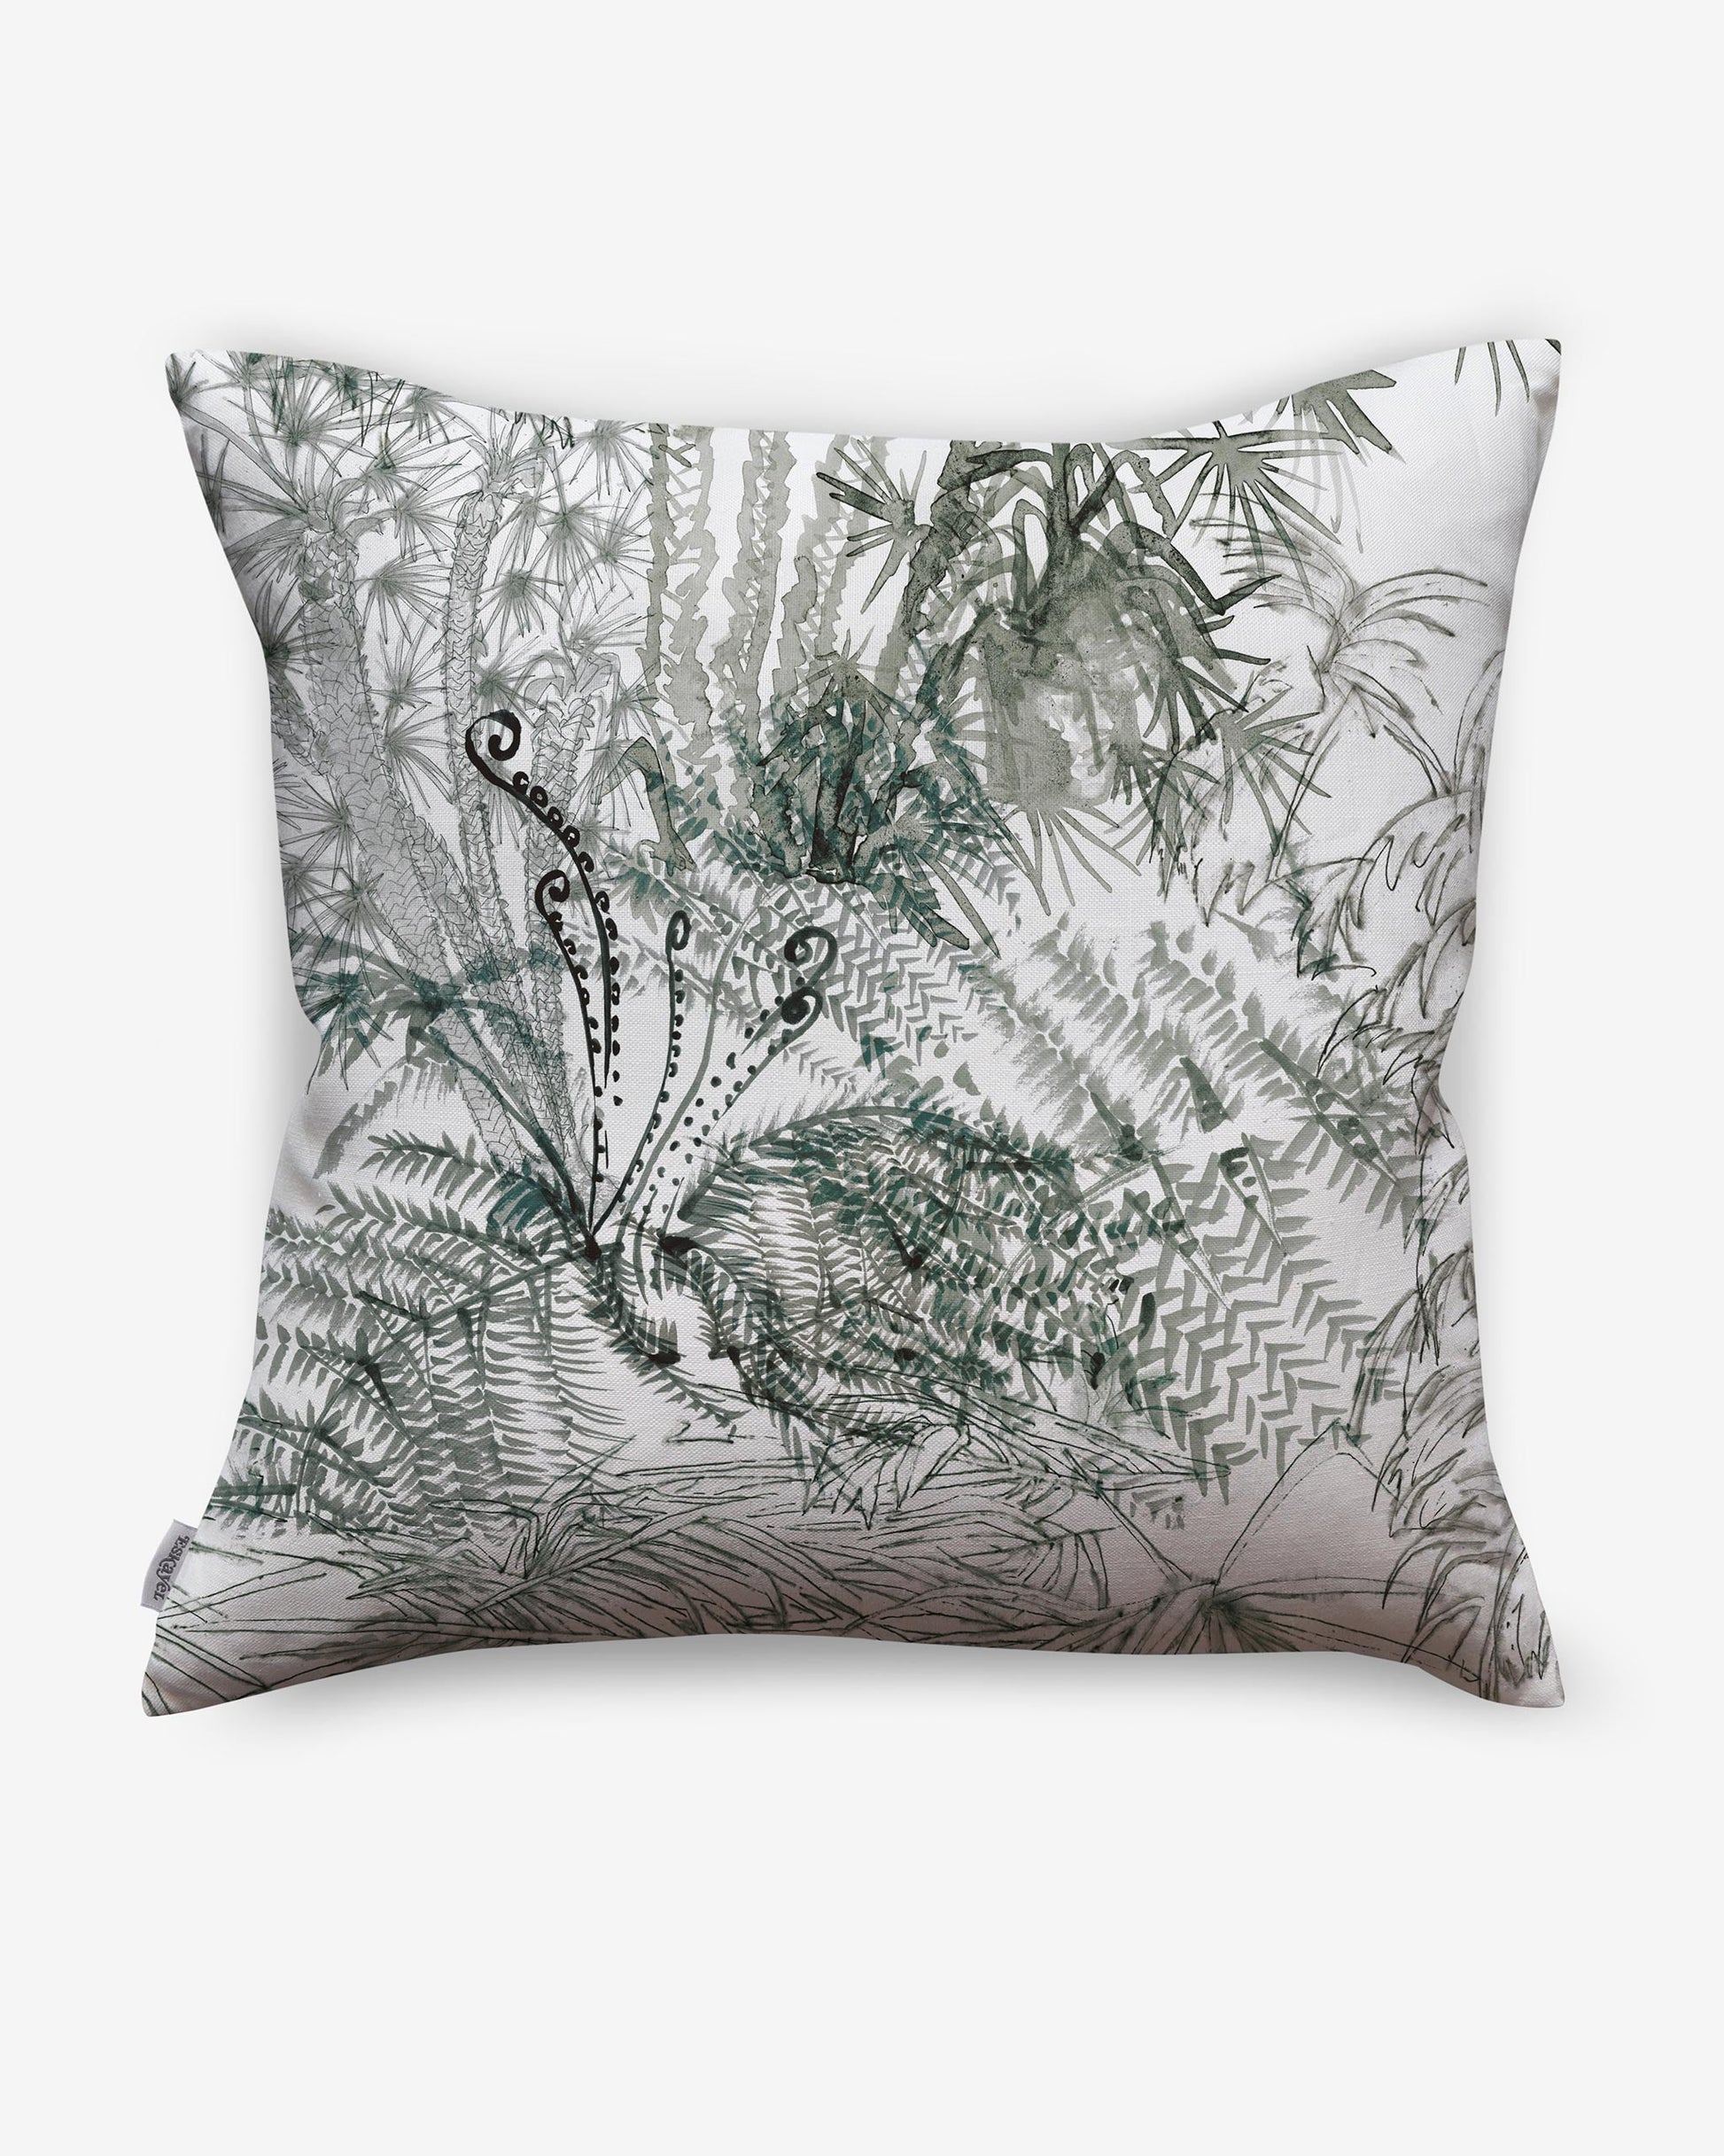 A Domenica Pillow Notte from the Salentu Collection featuring the Domenica pattern on a luxury fabric